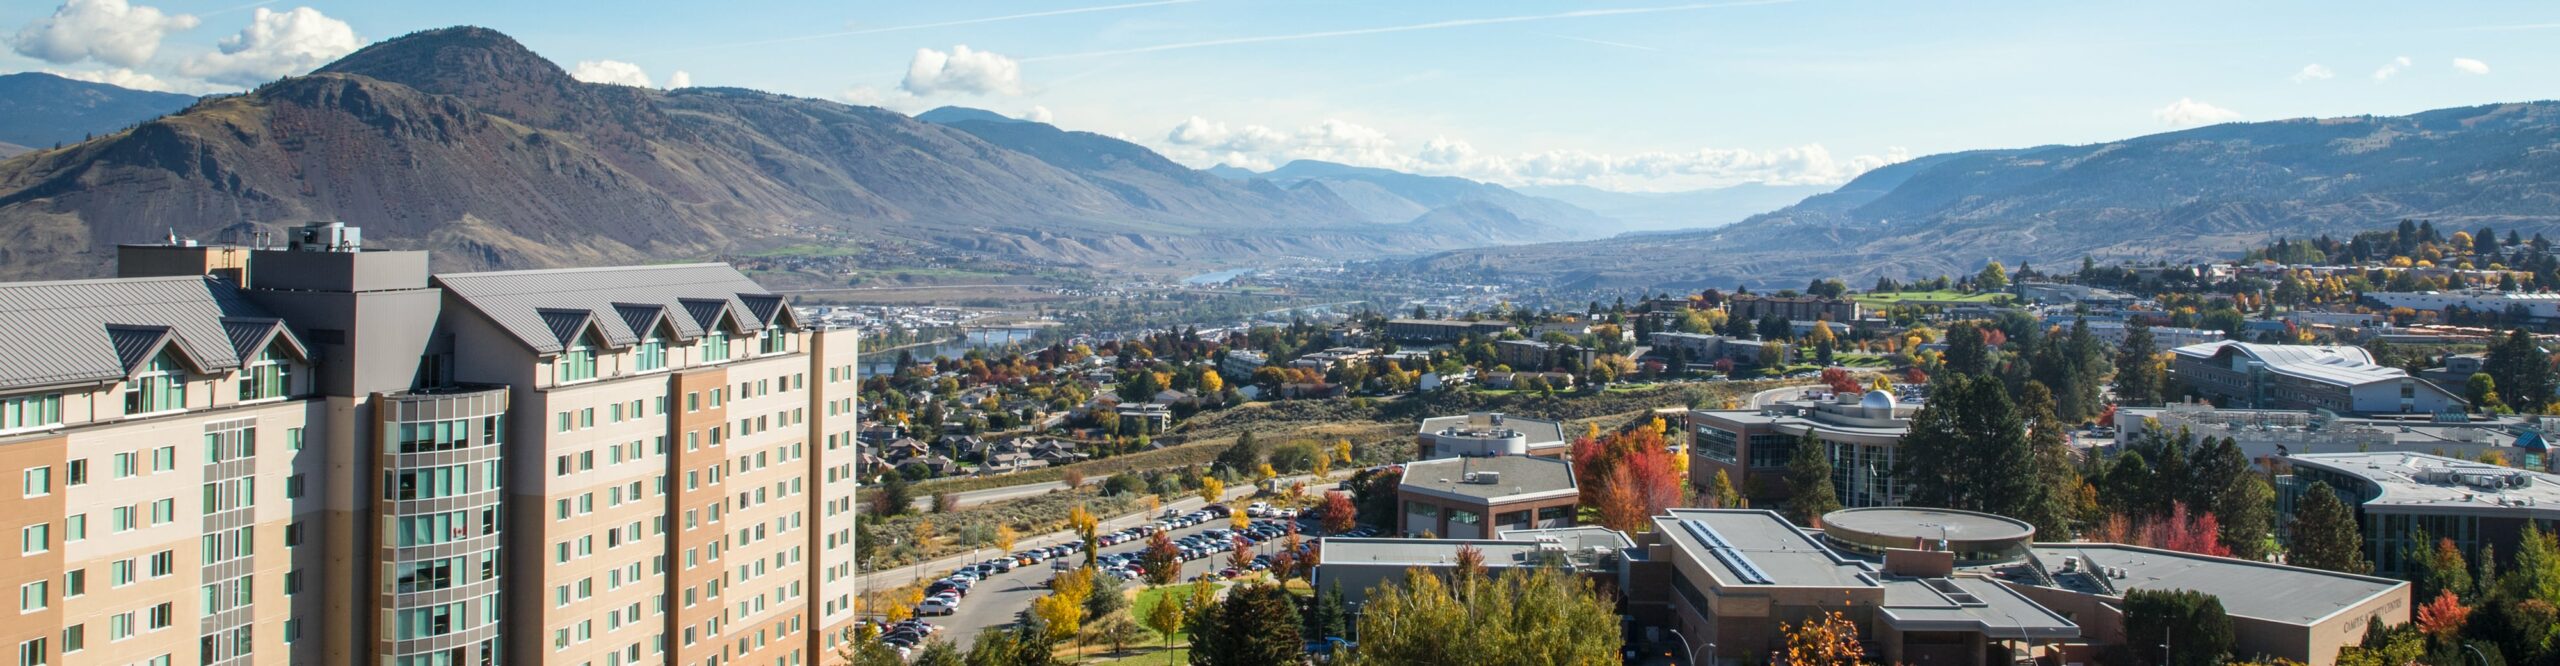 Thompson Rivers University campuses are on the traditional lands of the Tk'emlúps te Secwépemc (Kamloops campus) and the T’exelc (Williams Lake campus) within Secwépemc'ulucw, the traditional and unceded territory of the Secwépemc. Our region also extends into the territories of the St’át’imc, Nlaka’pamux, Nuxalk, Tŝilhqot'in, Dakelh, and Syilx peoples.